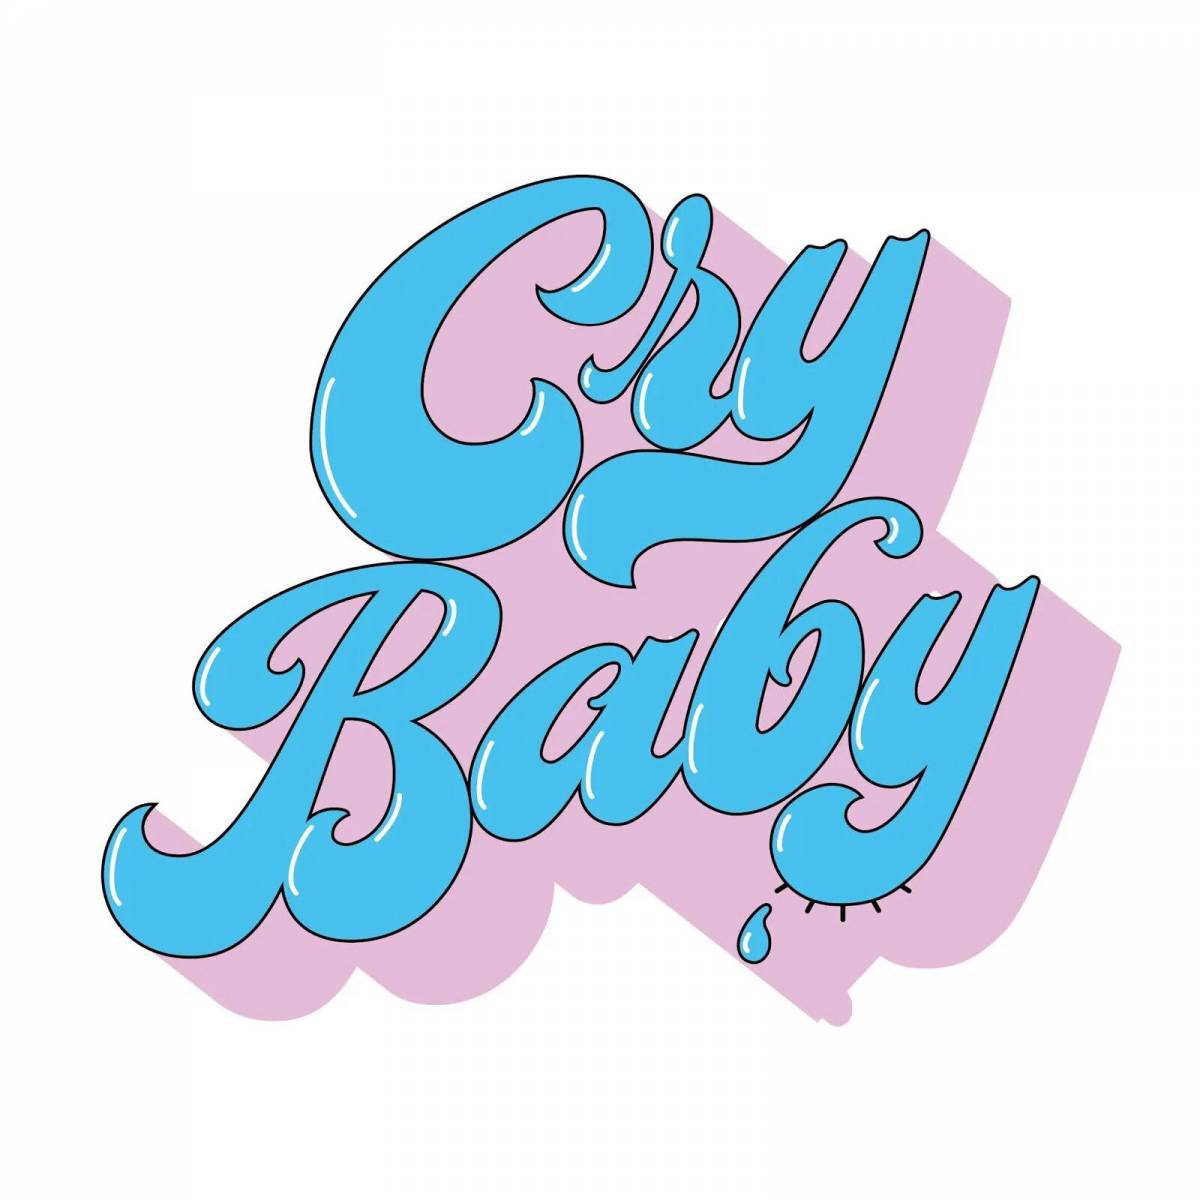 Crybaby #5